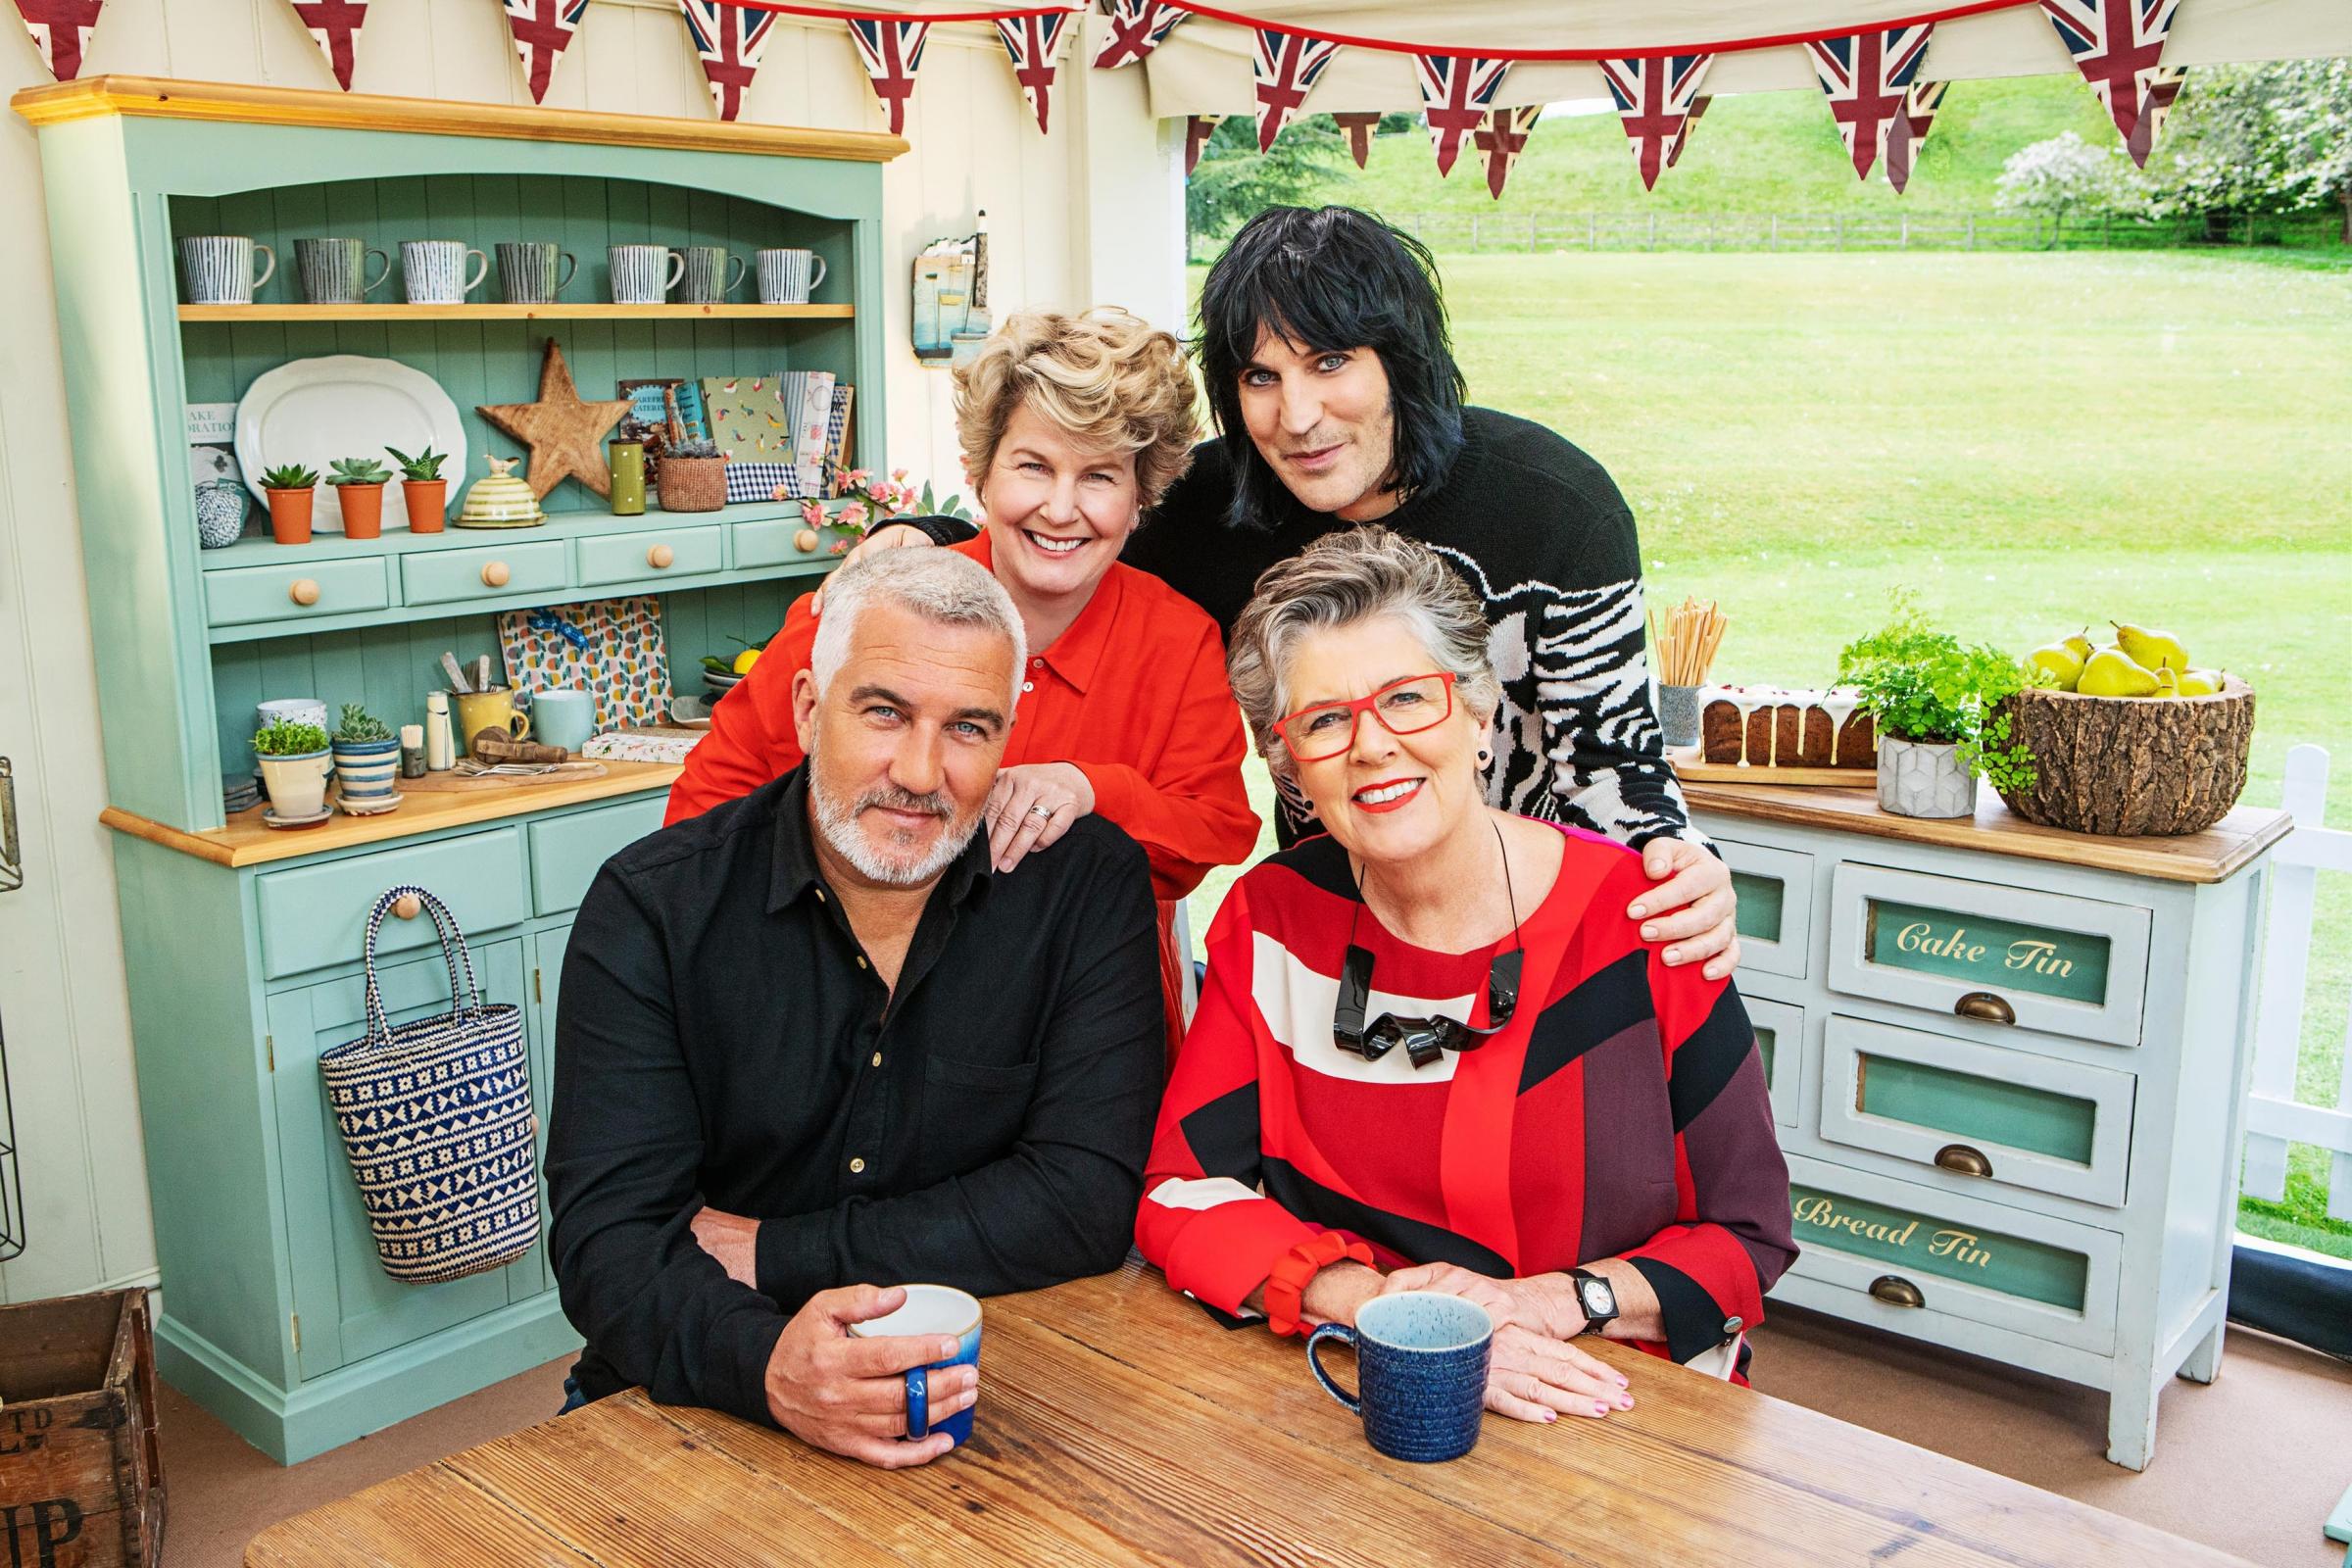 How to apply for new series of The Great British Bake Off